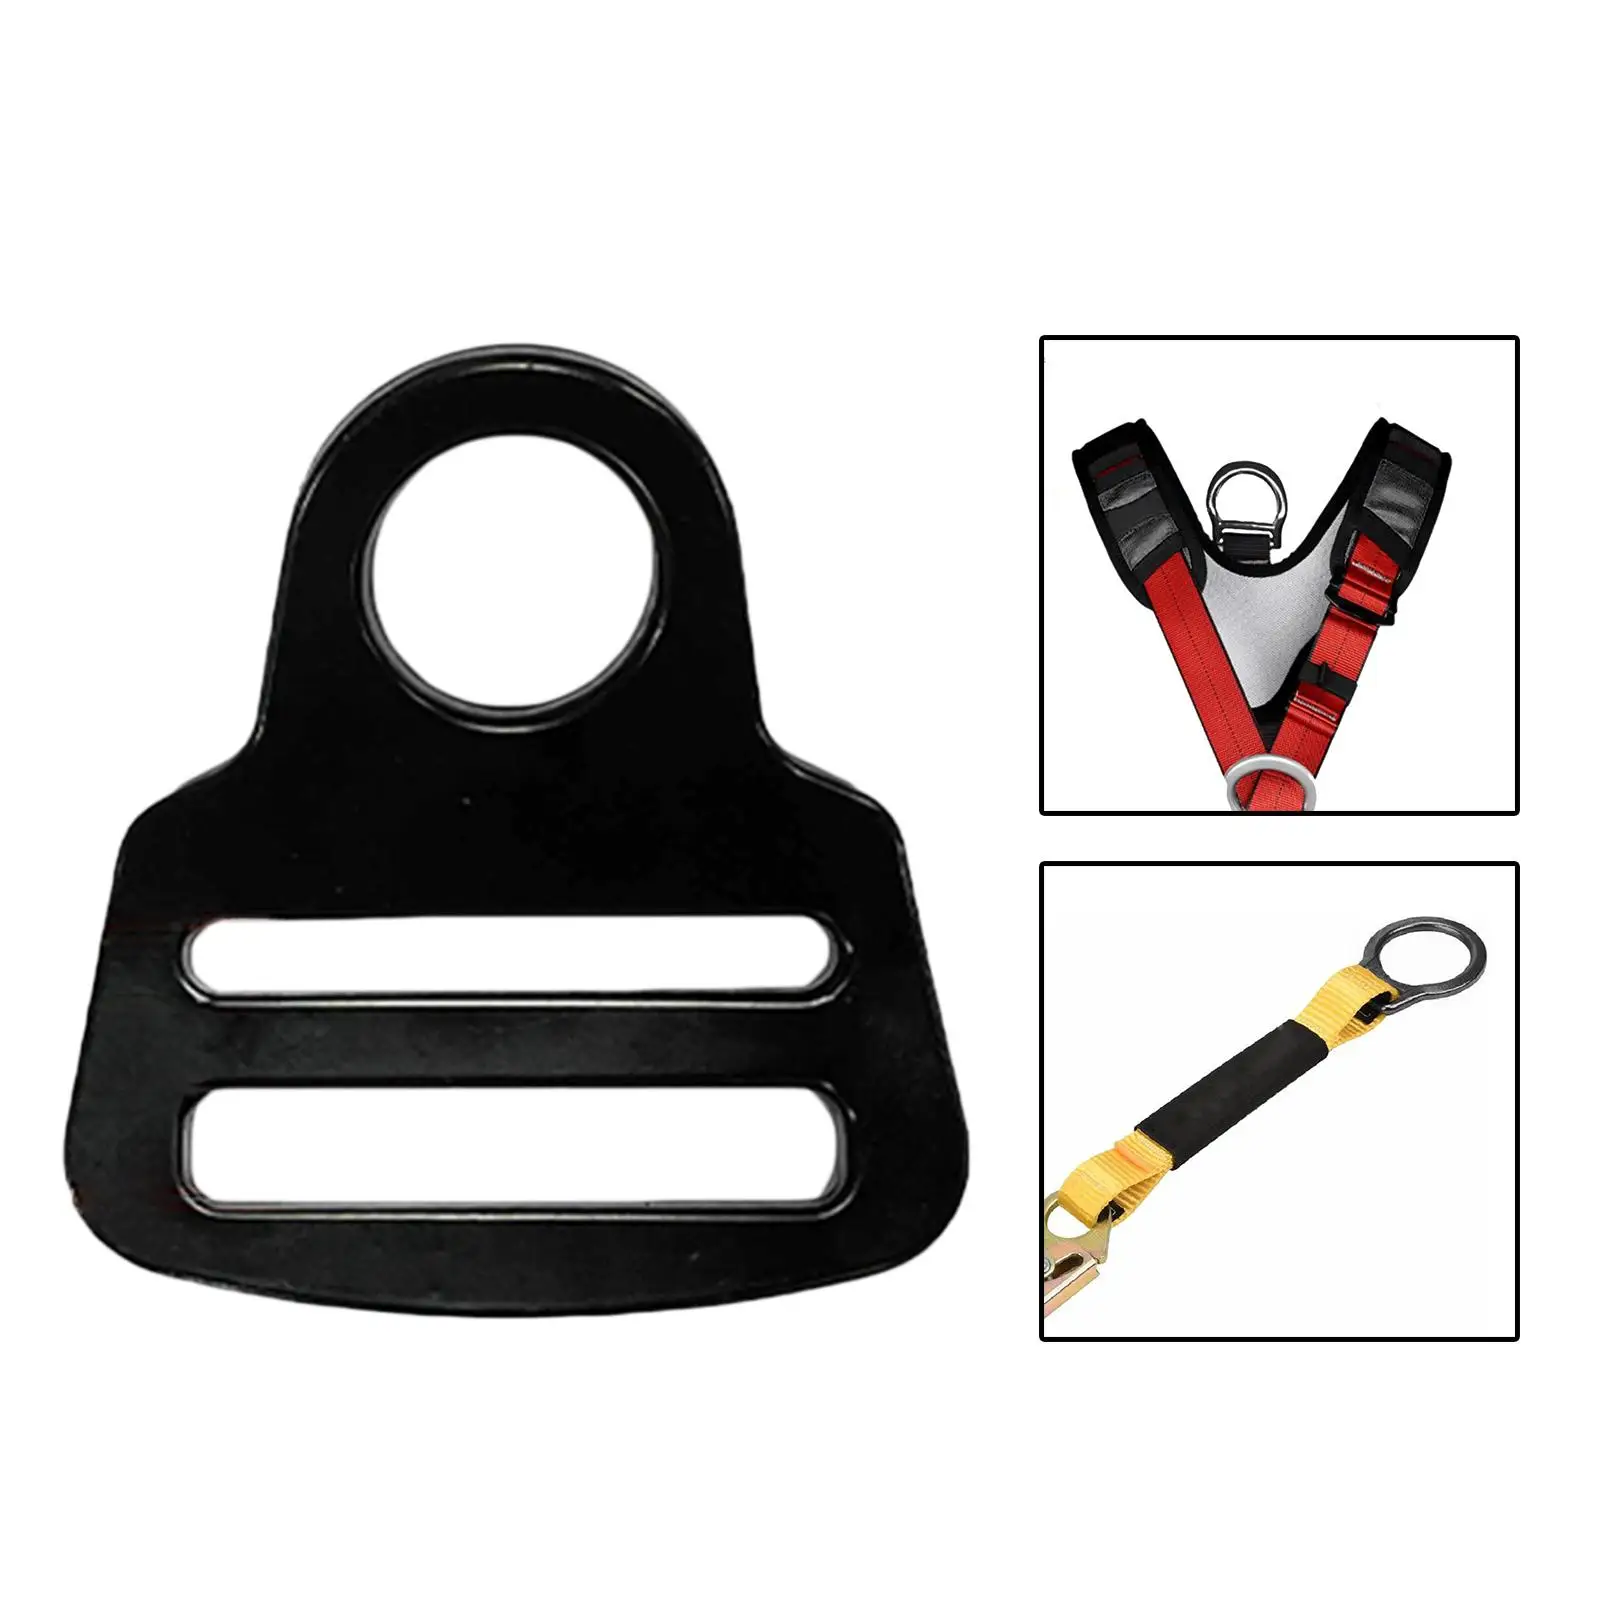 Safety Harness D Rings Heavy Duty D Shaped Rings Double Slotted D Rings for Work Caving Rappelling Construction Climbing